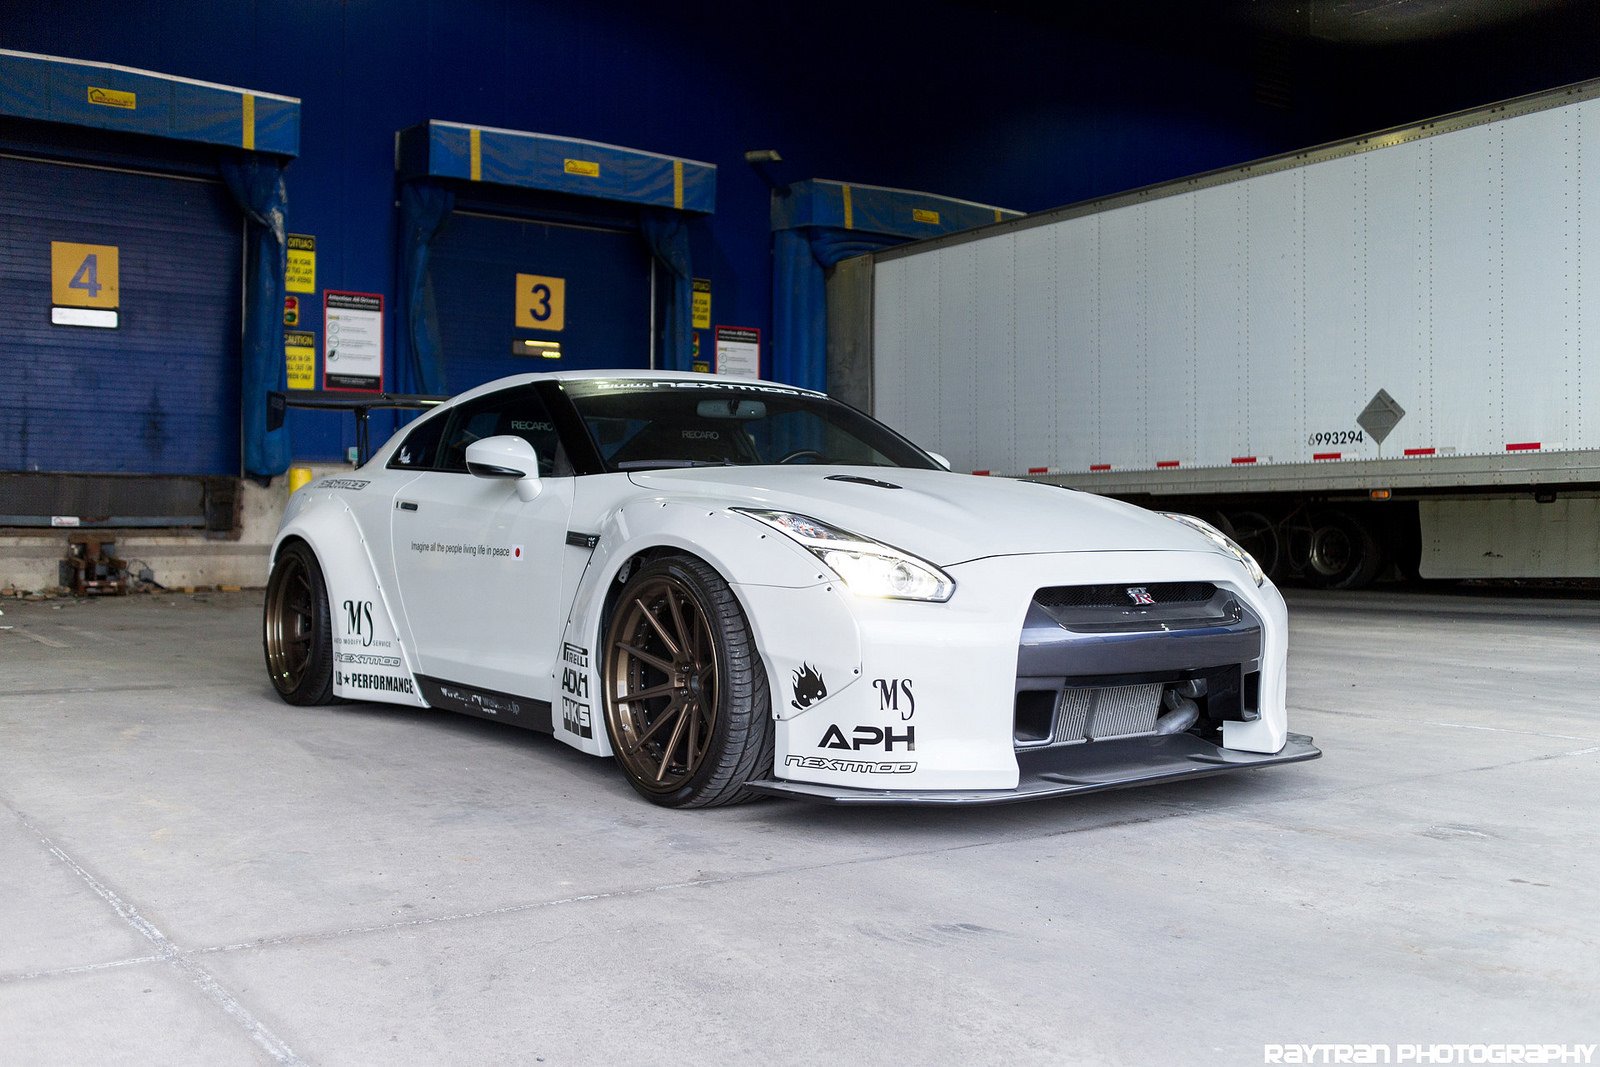 gt r, Nismo, Nissan, R35, Tuning, Supercar, Coupe, Japan, Cars, Blanc, White, Bianco Wallpaper